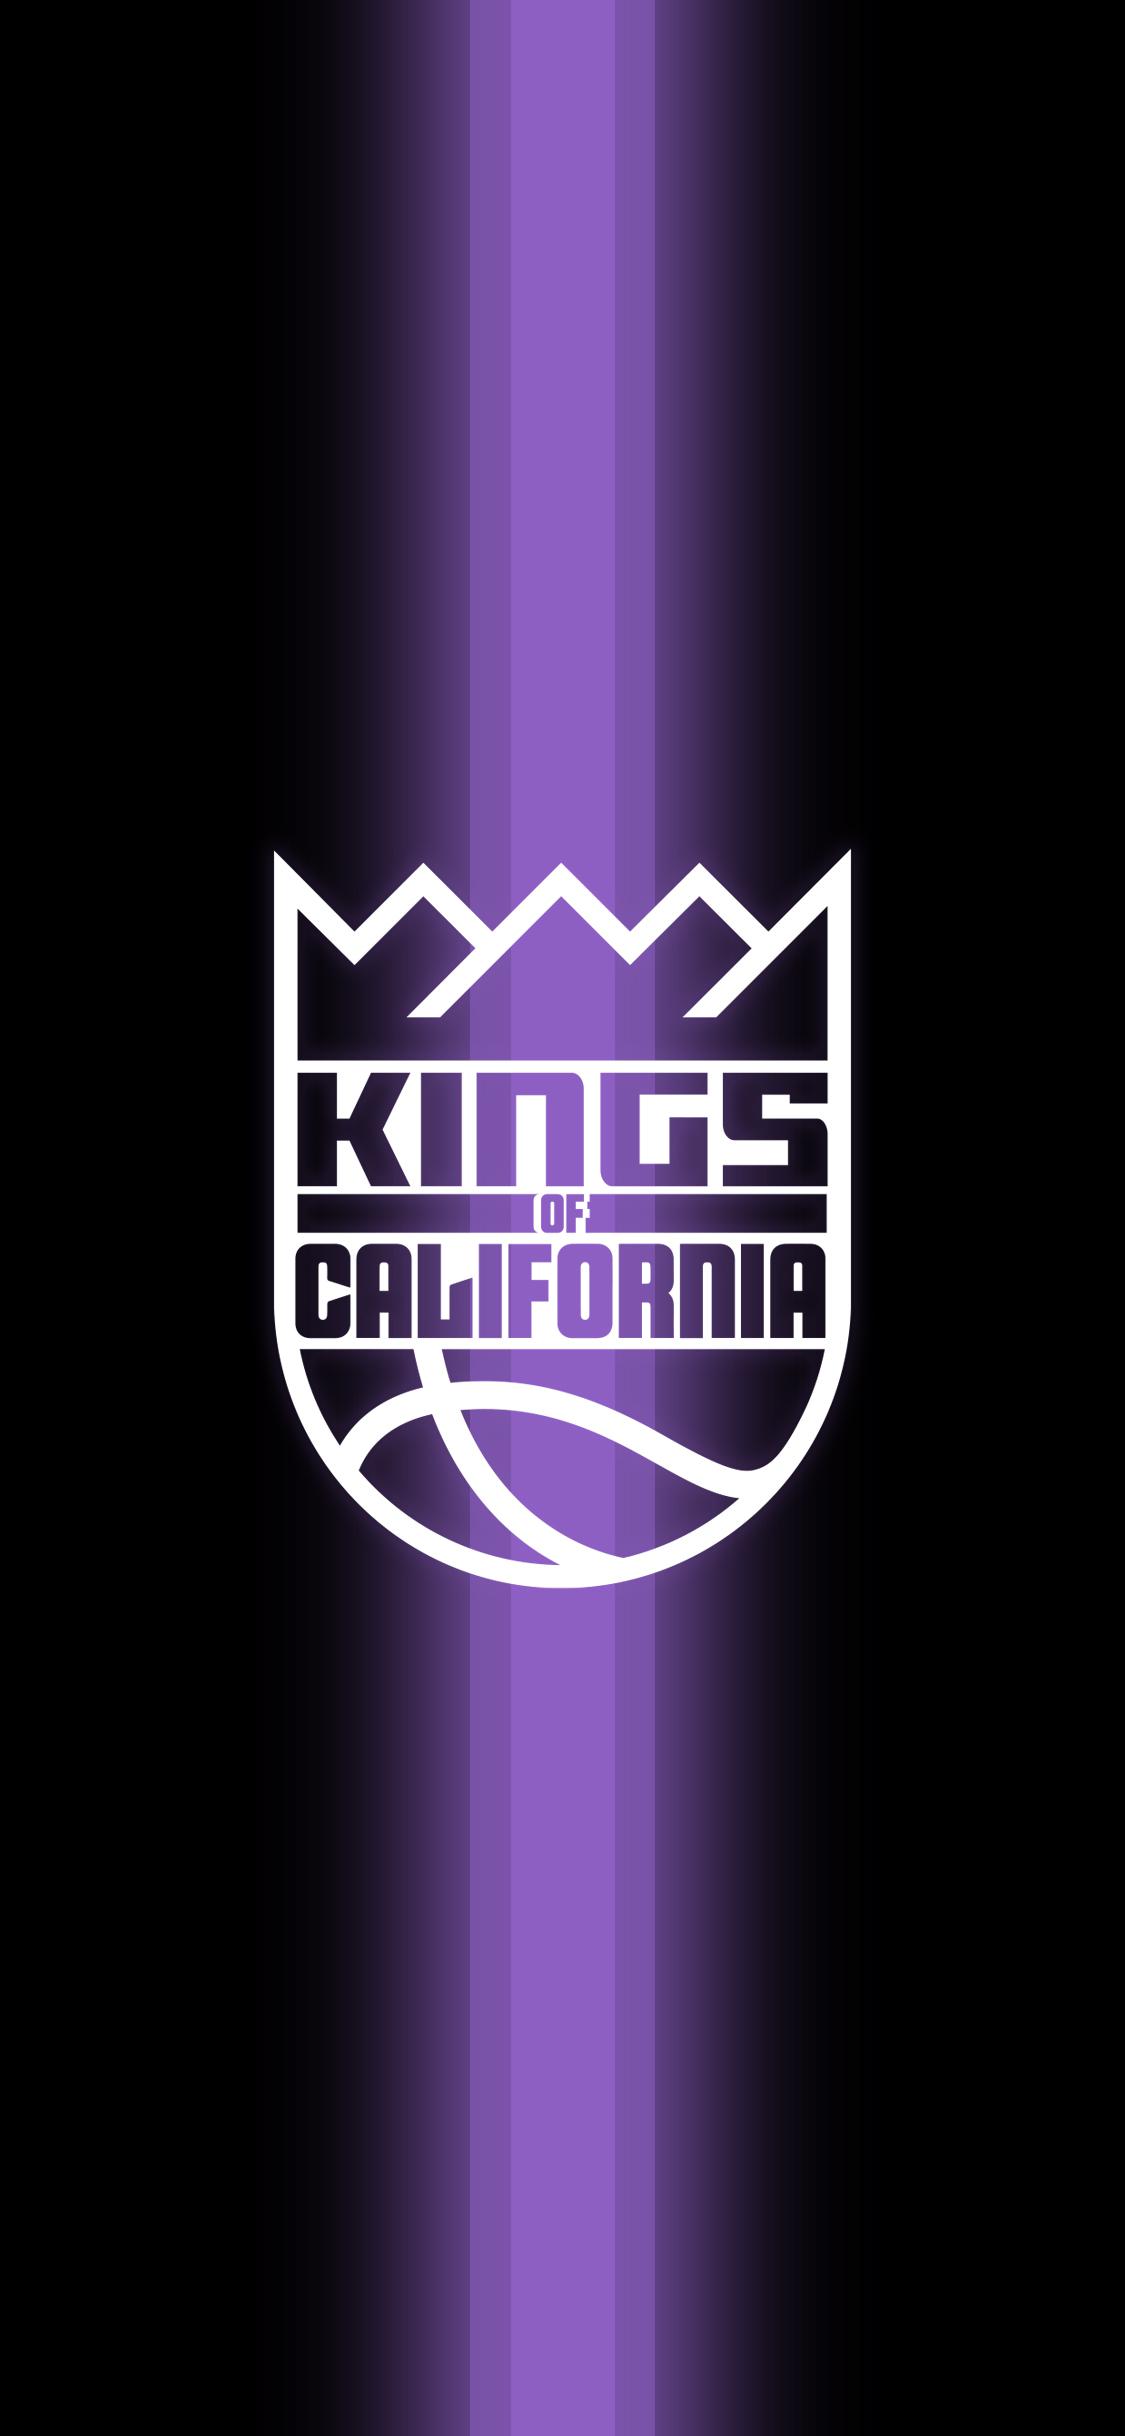 Phone wallpaper for the best team in California!